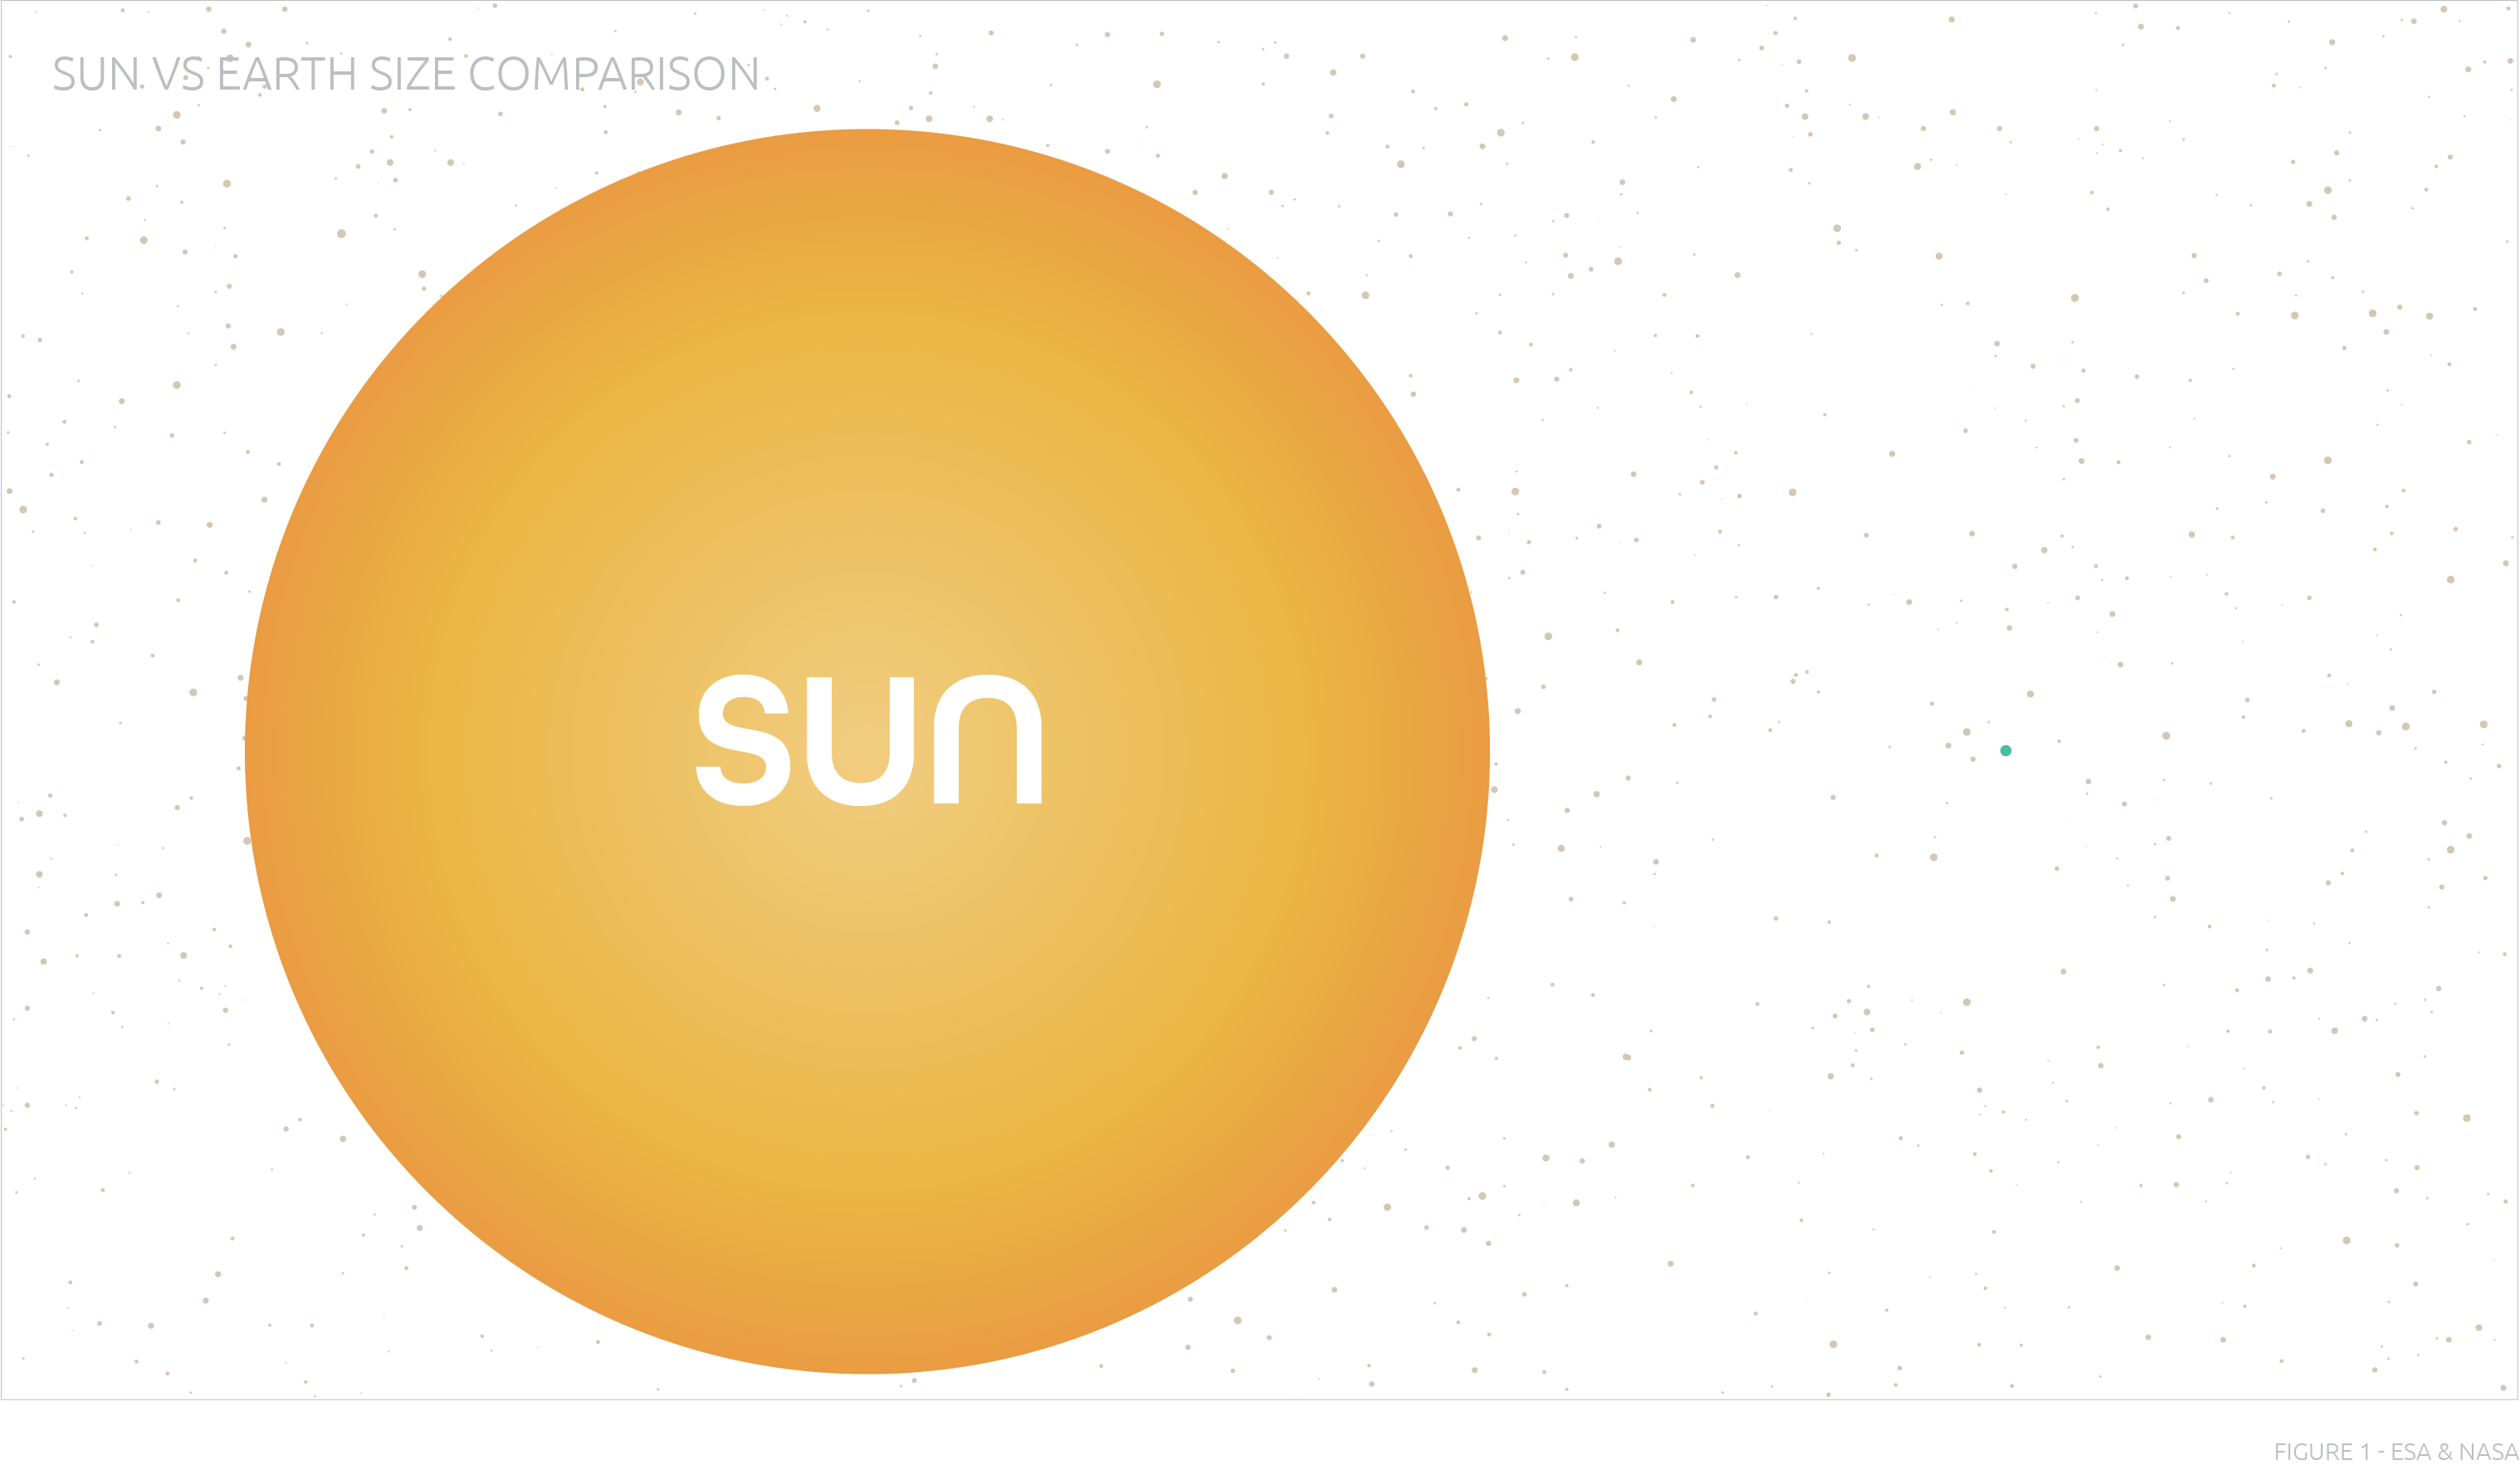 Illustrative example comparing the size of the earth to the sun